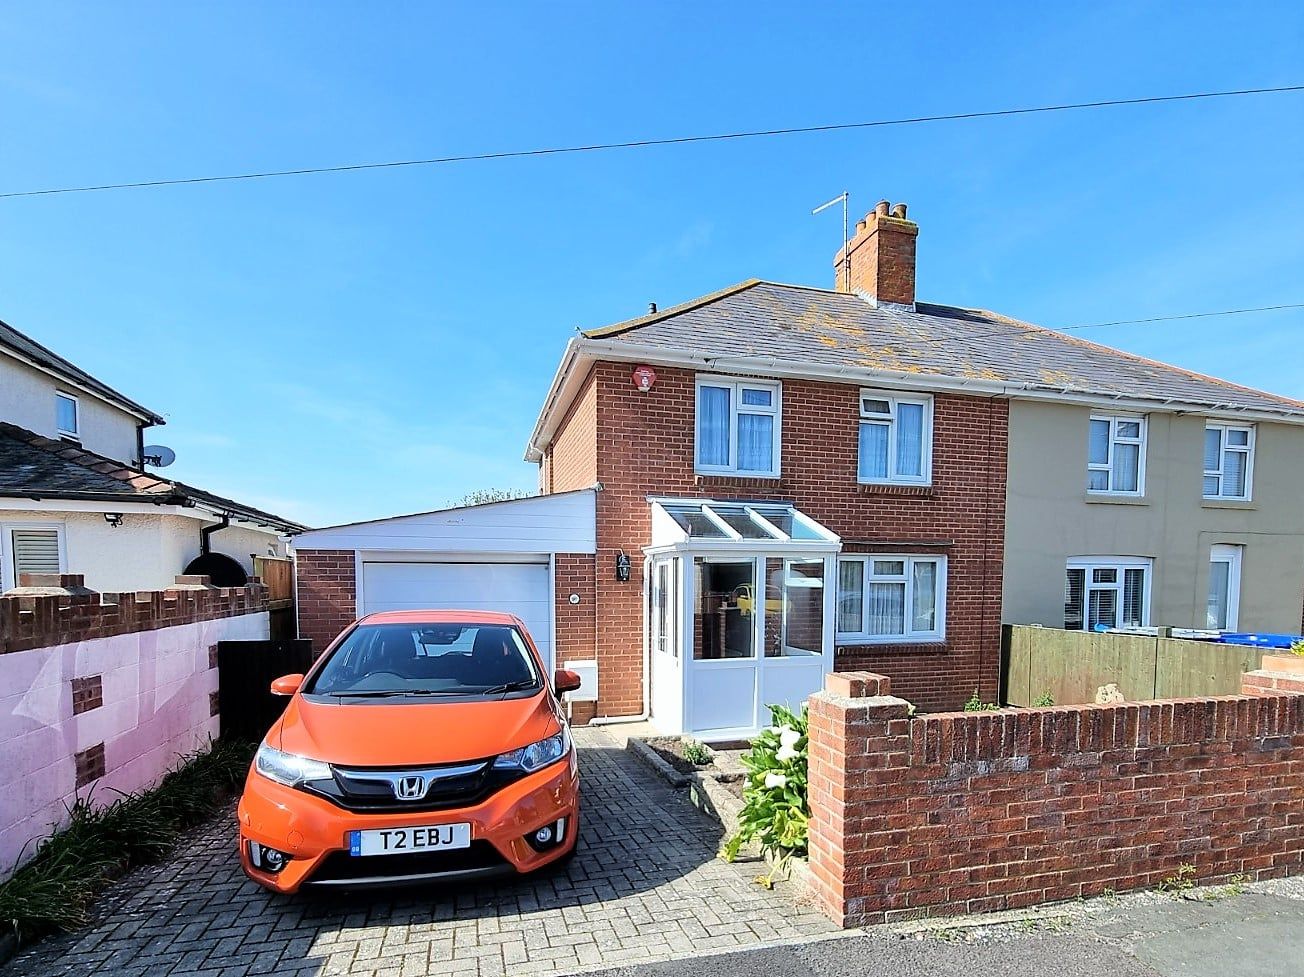 97 Kitchener Road, Weymouth, Dorset, DT4 0LL